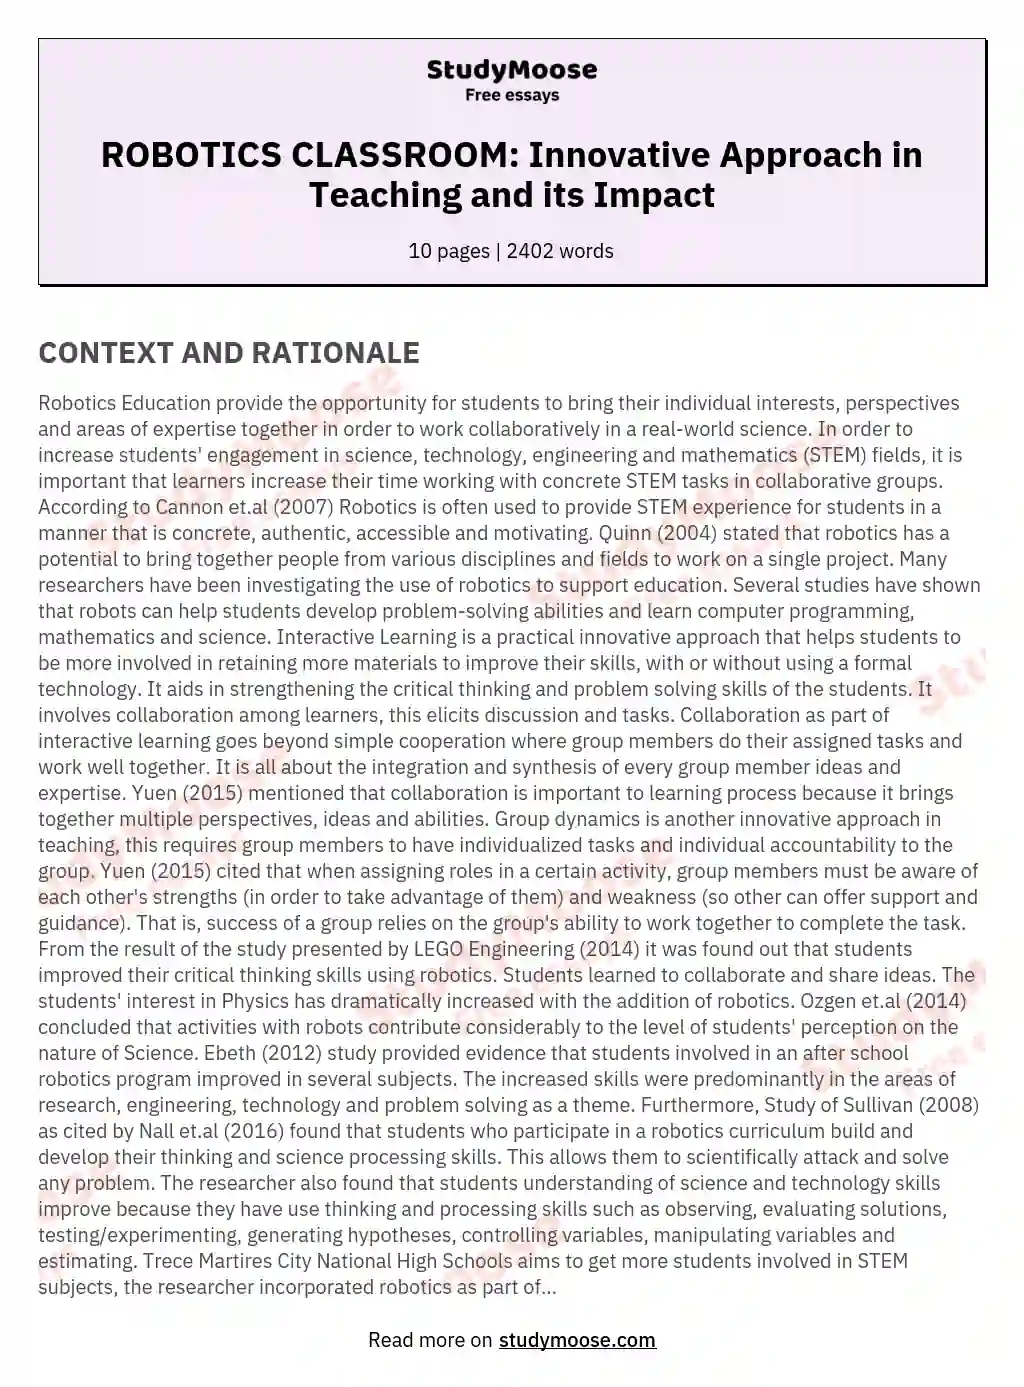 ROBOTICS CLASSROOM: Innovative Approach in Teaching and its Impact essay